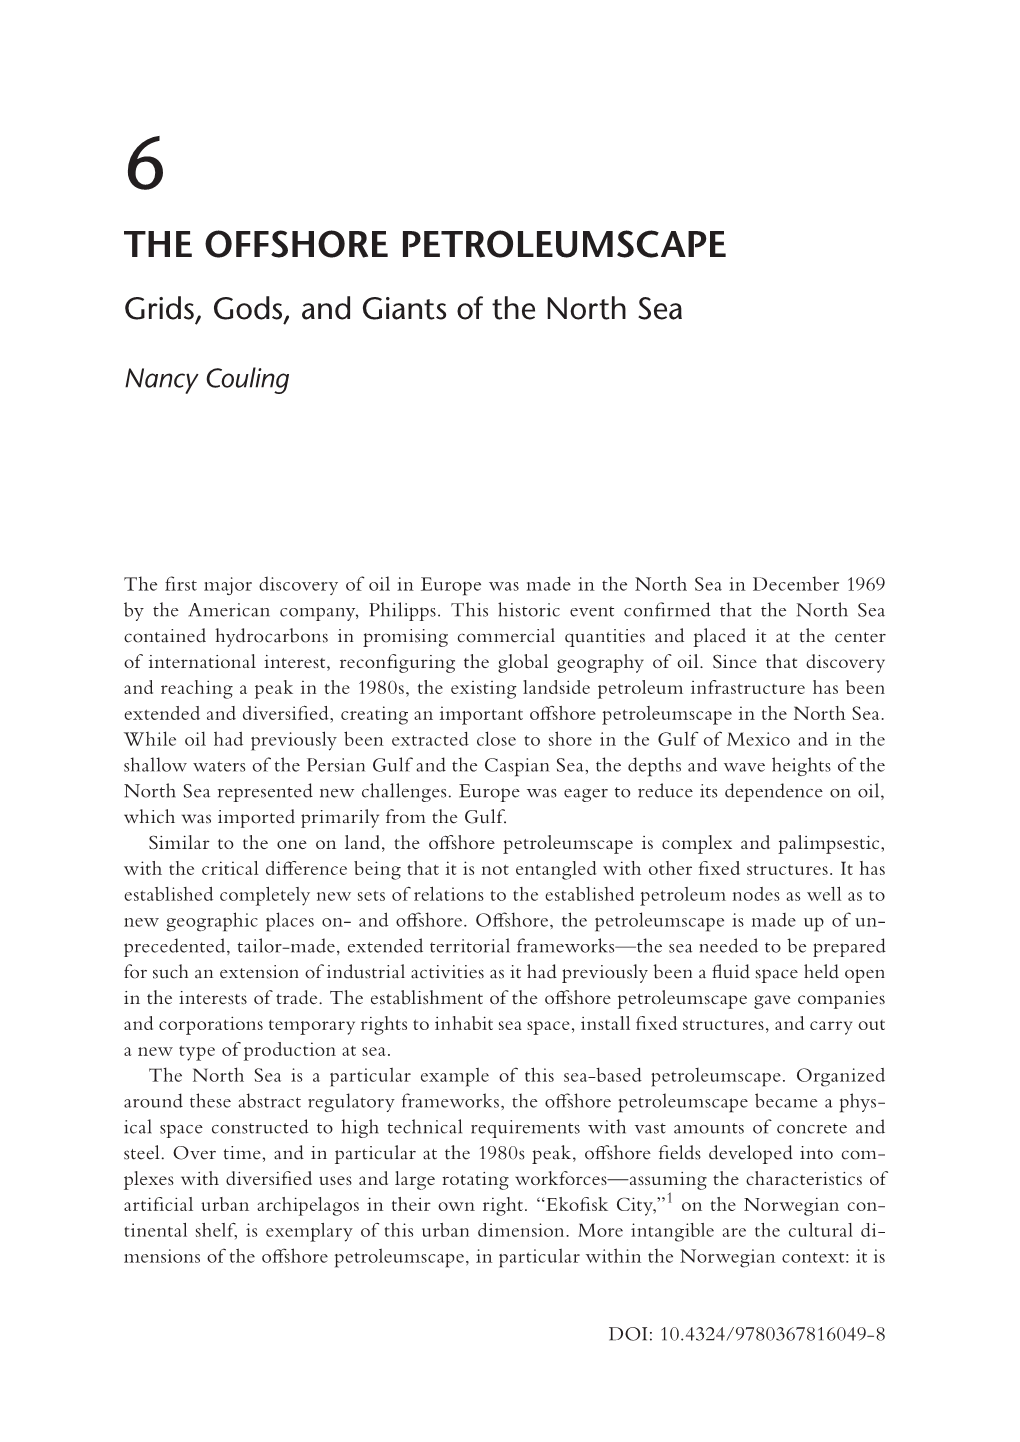 THE OFFSHORE PETROLEUMSCAPE Grids, Gods, and Giants of the North Sea